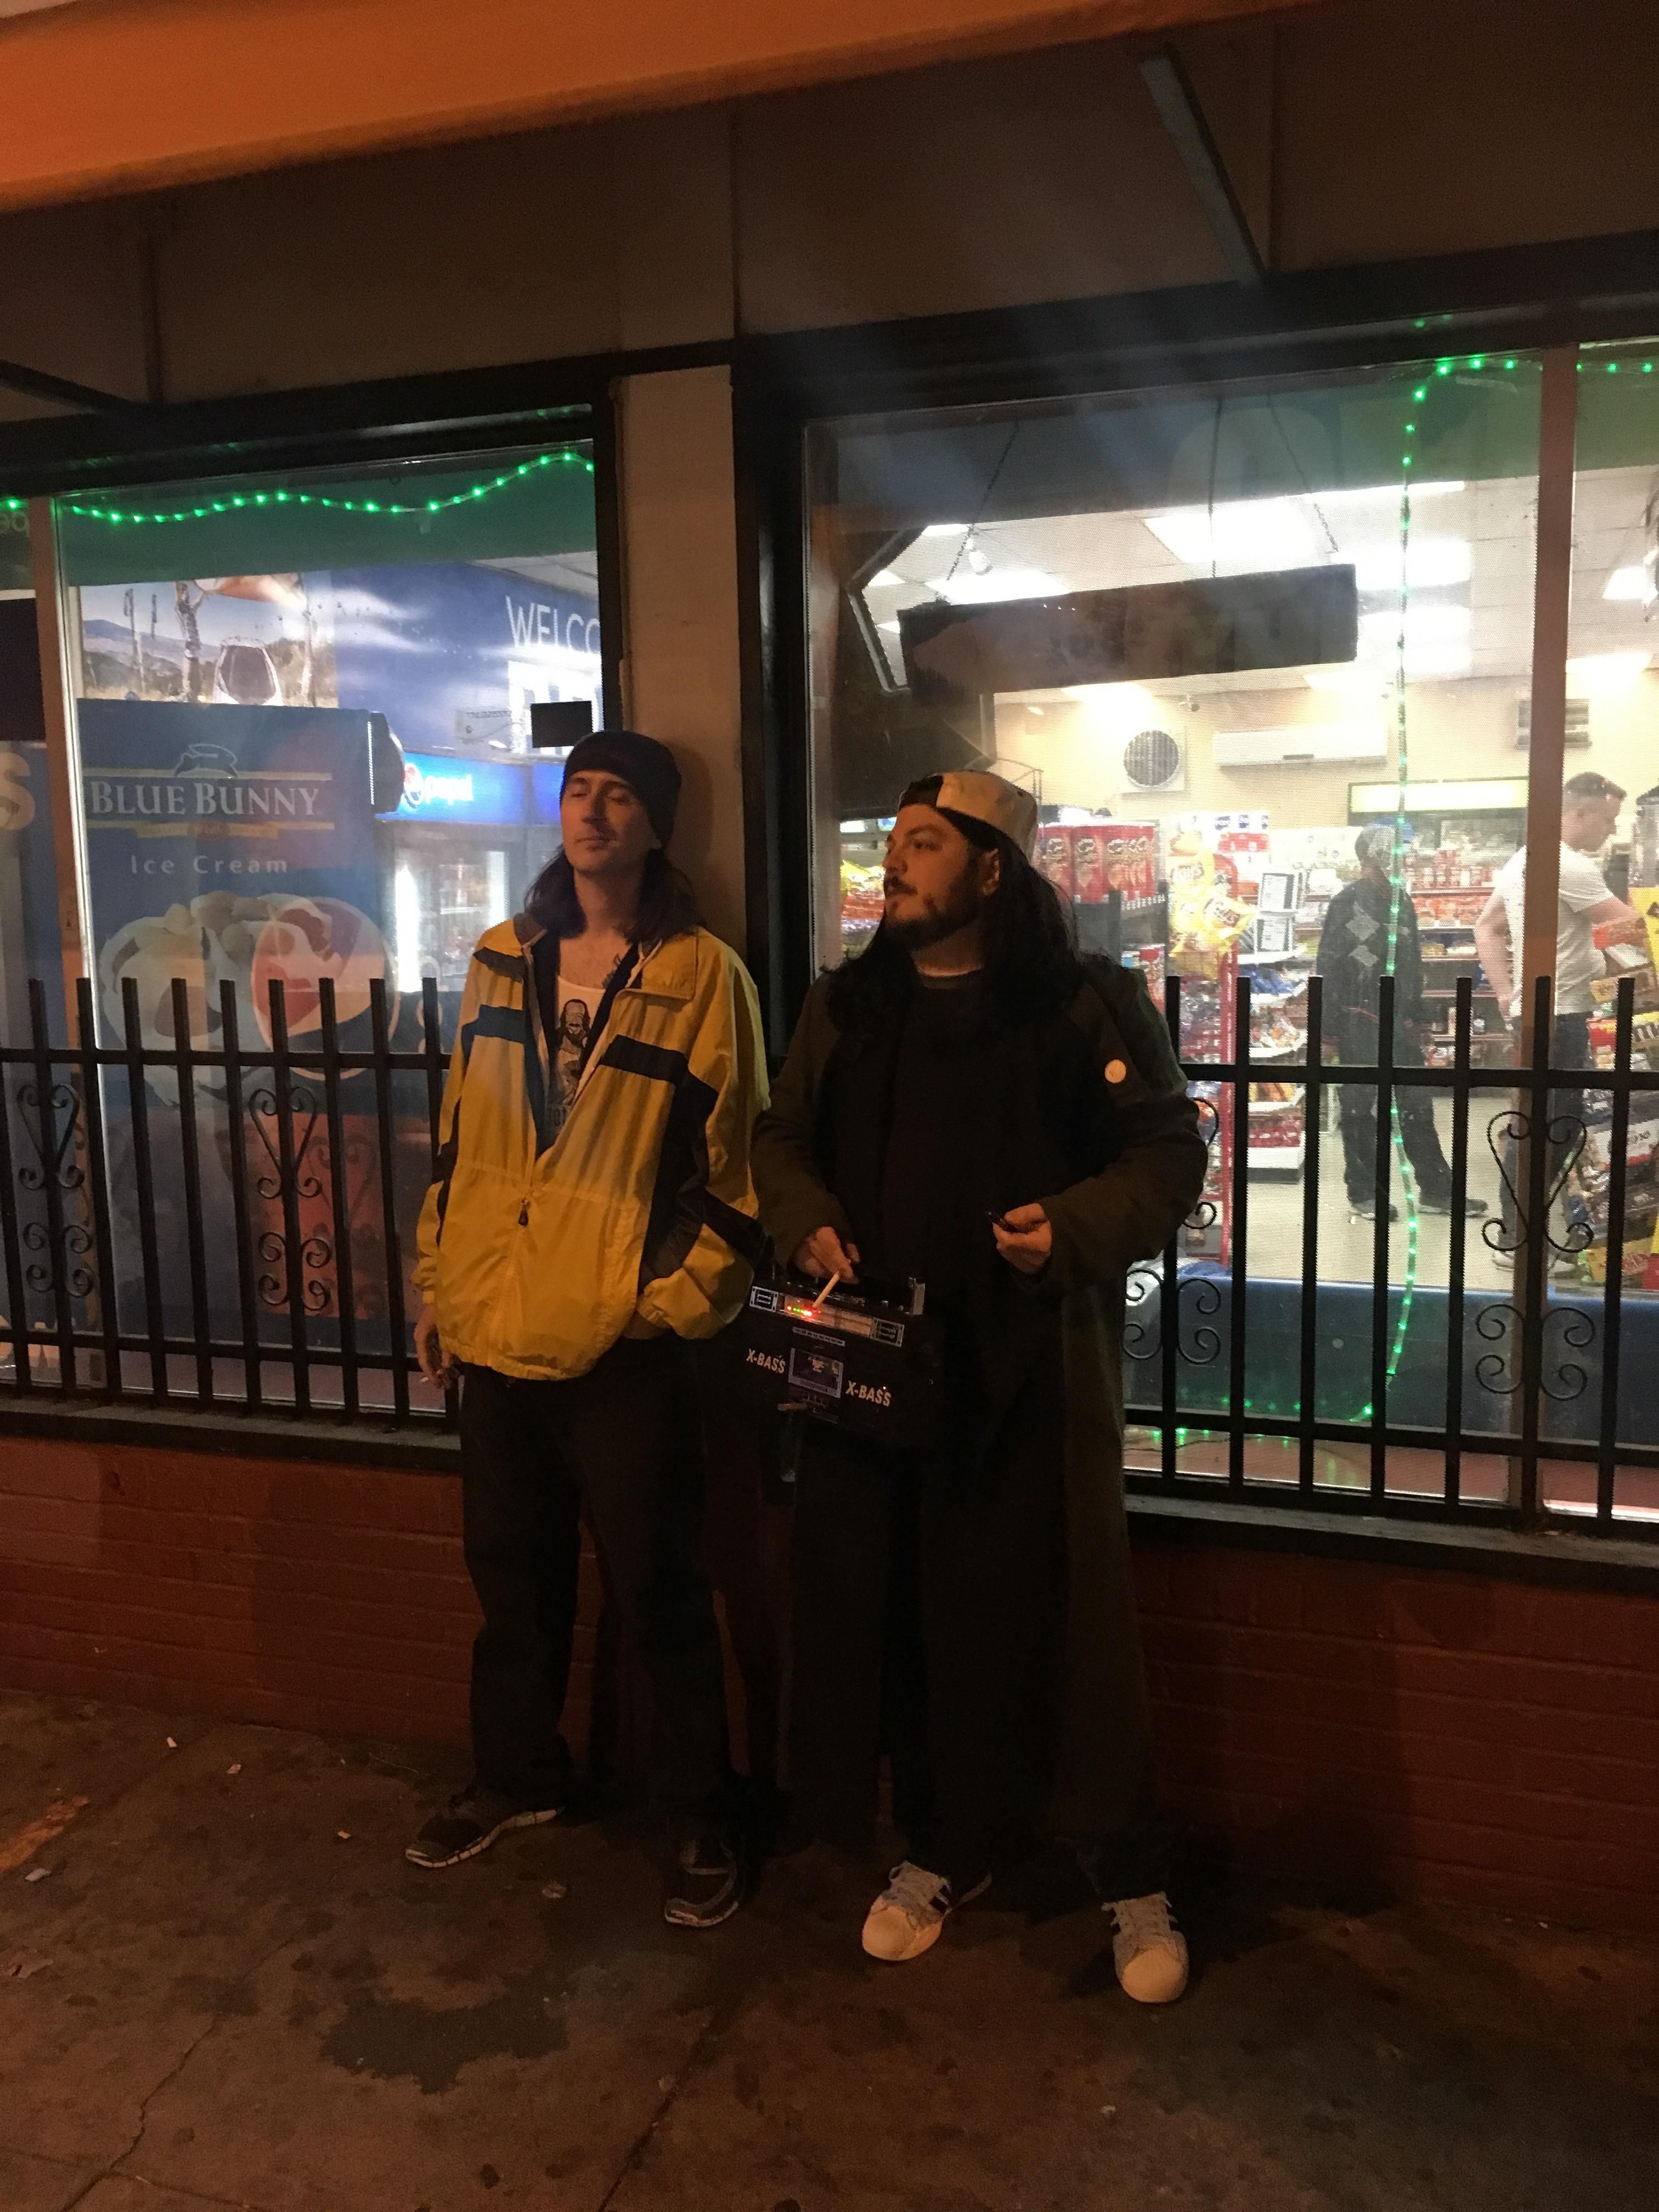 These dudes dressed up like Jay and Silent Bob and hung out in front of a convenience store all night.